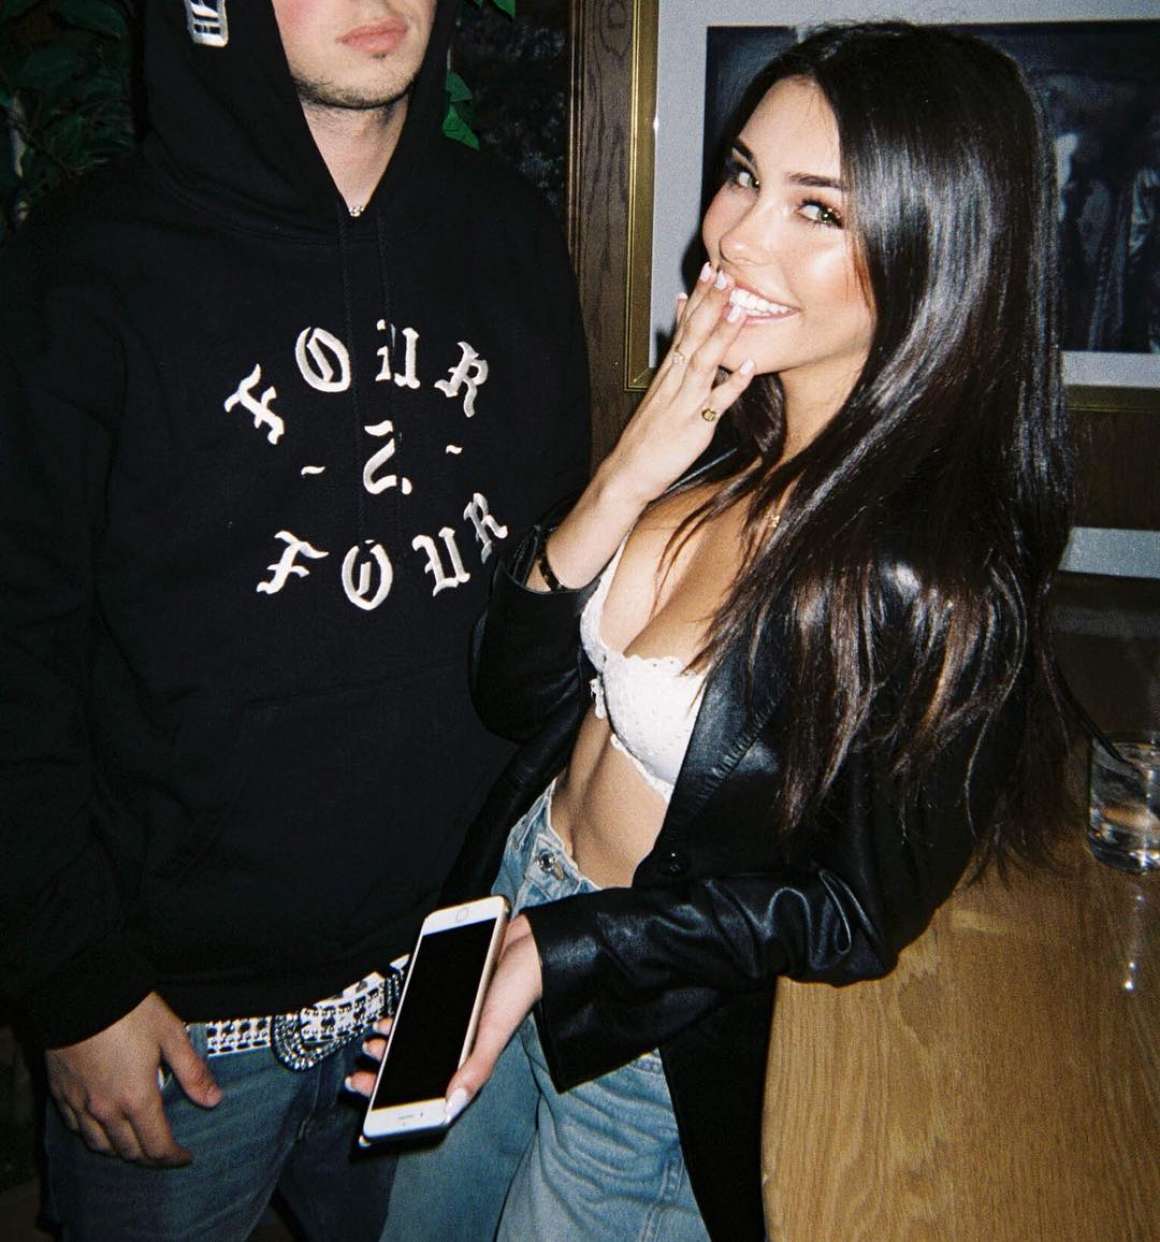 Madison Beer 2019 : Madison Beer: Personal Pics -01